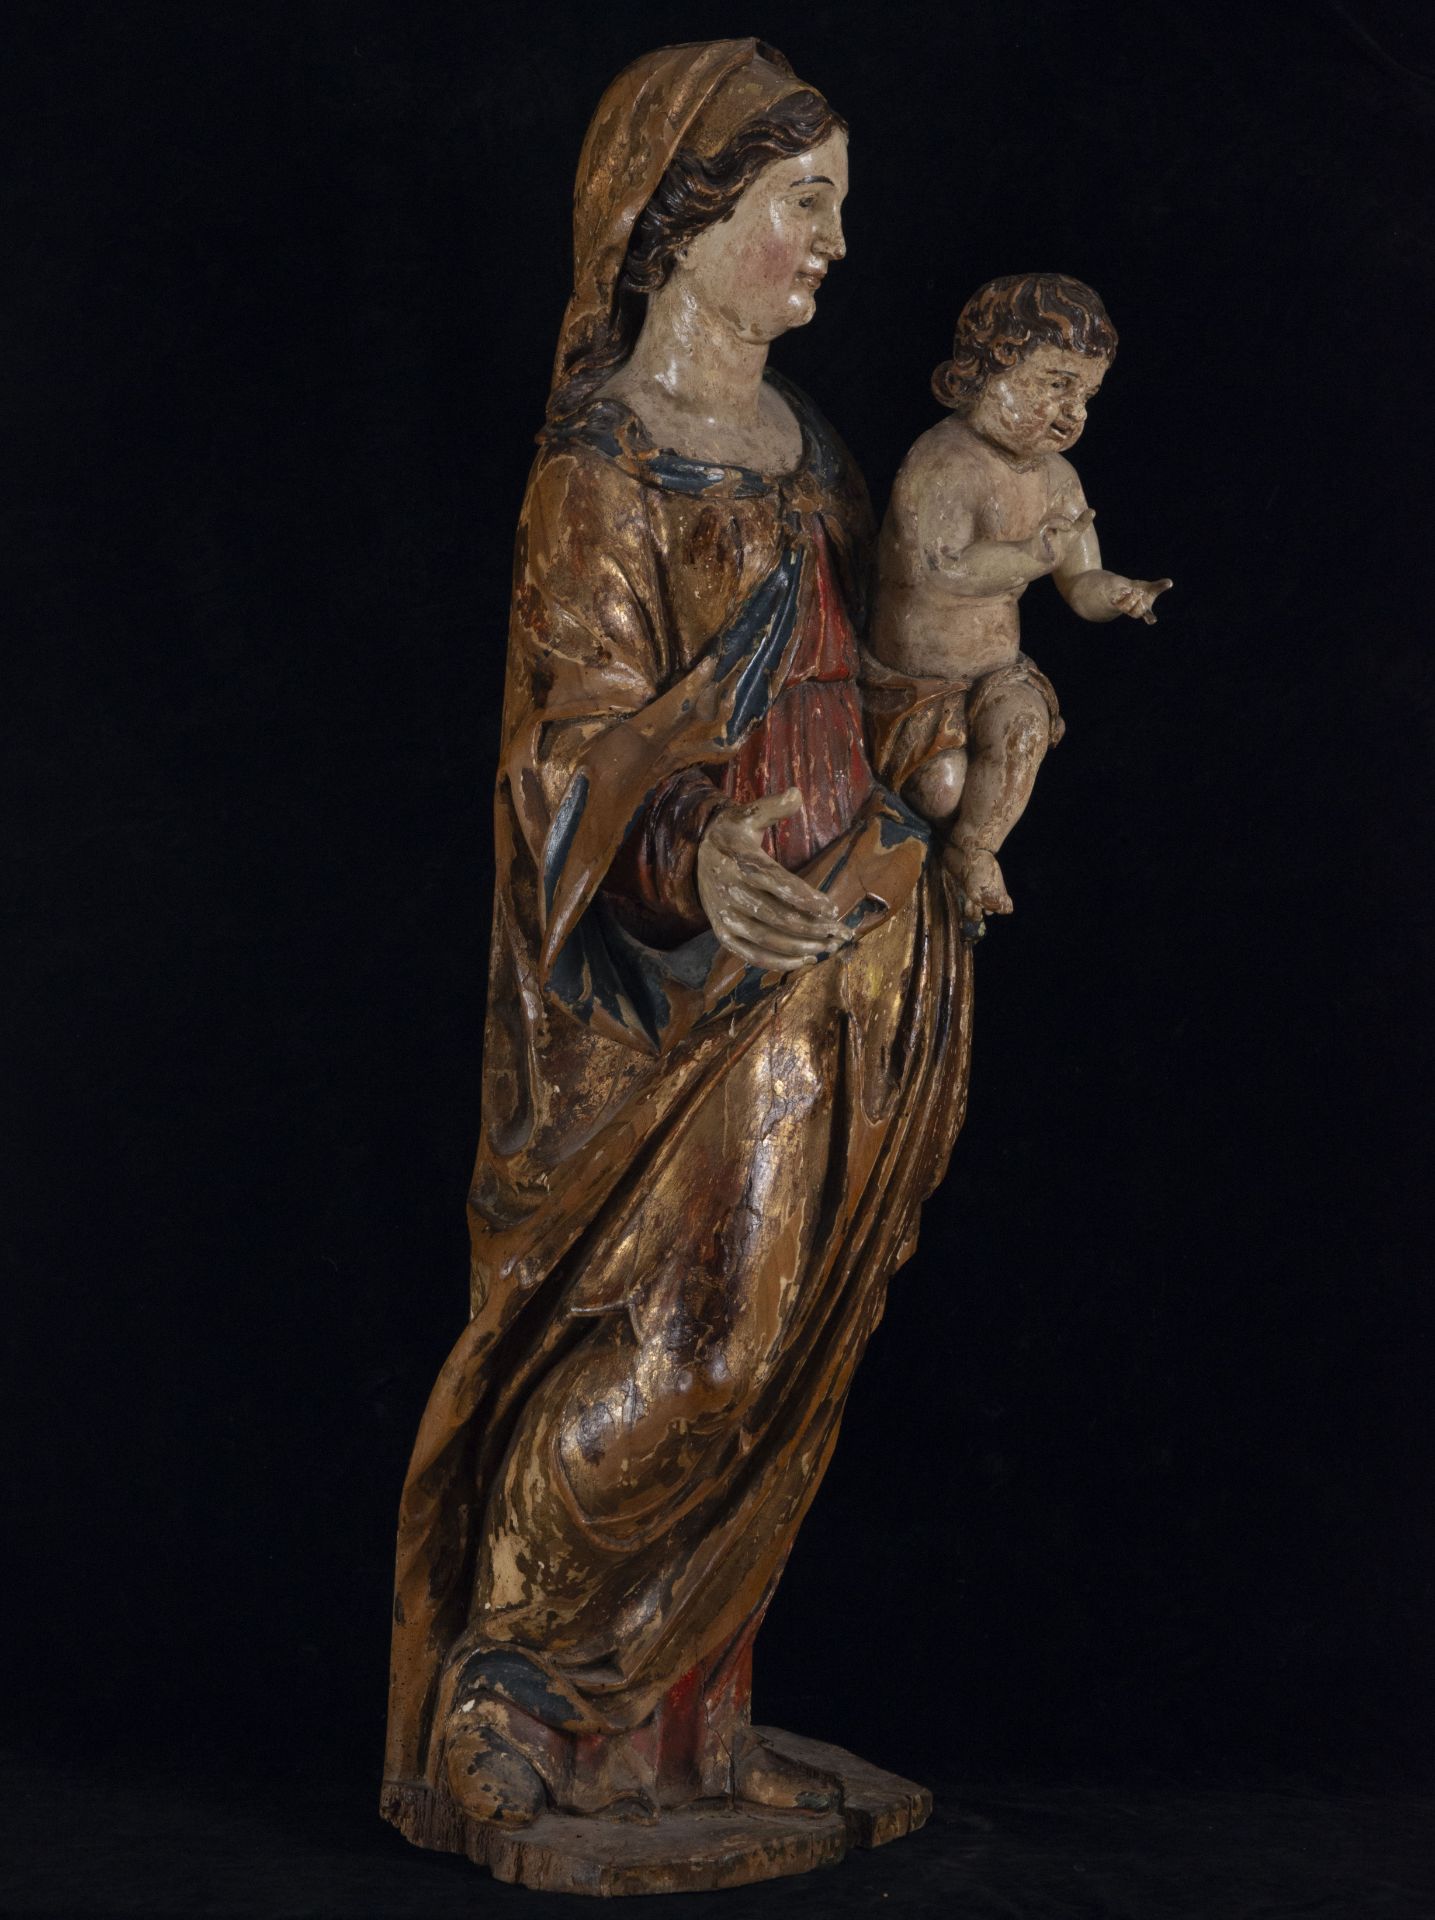 Madonna with Child in polychrome Walnut wood, South German school of the early 16th century - Image 3 of 4